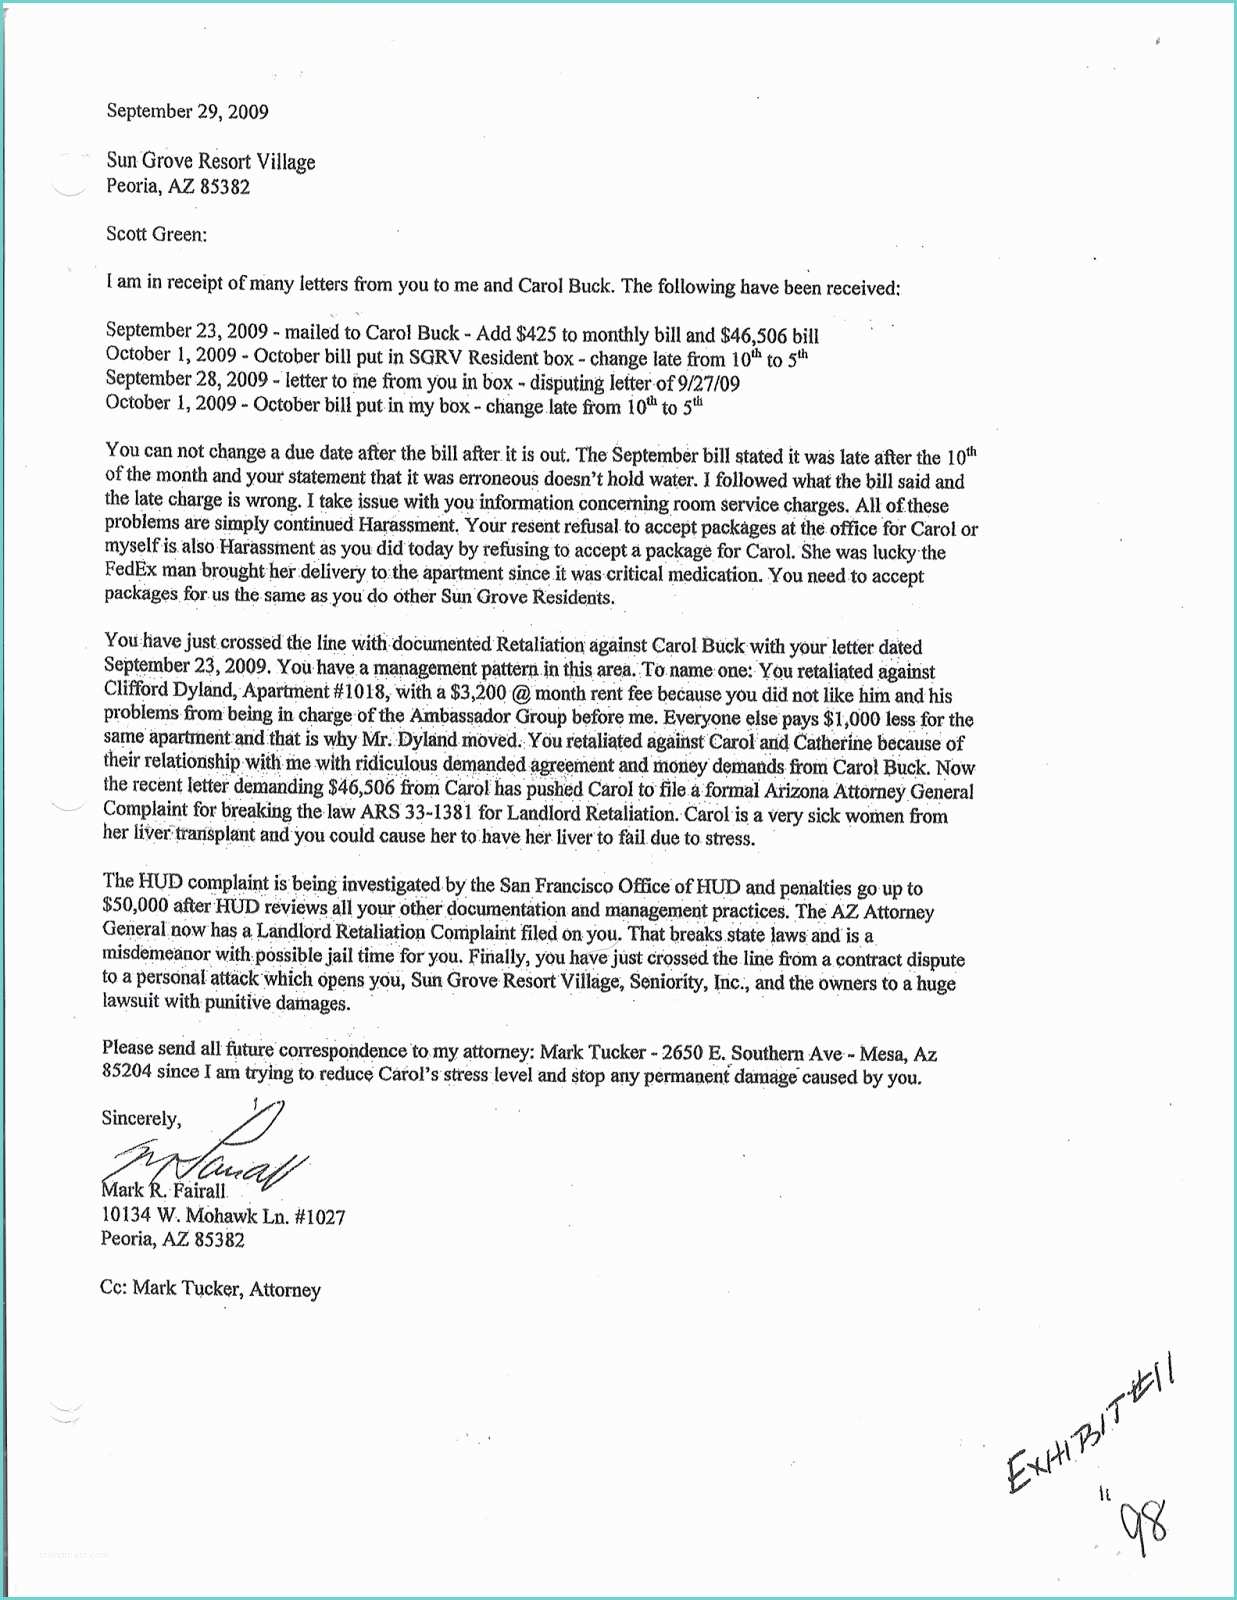 Sample Accommodation Request Letter why Hud Failed On the Fairall V Sun Grove Resort Village